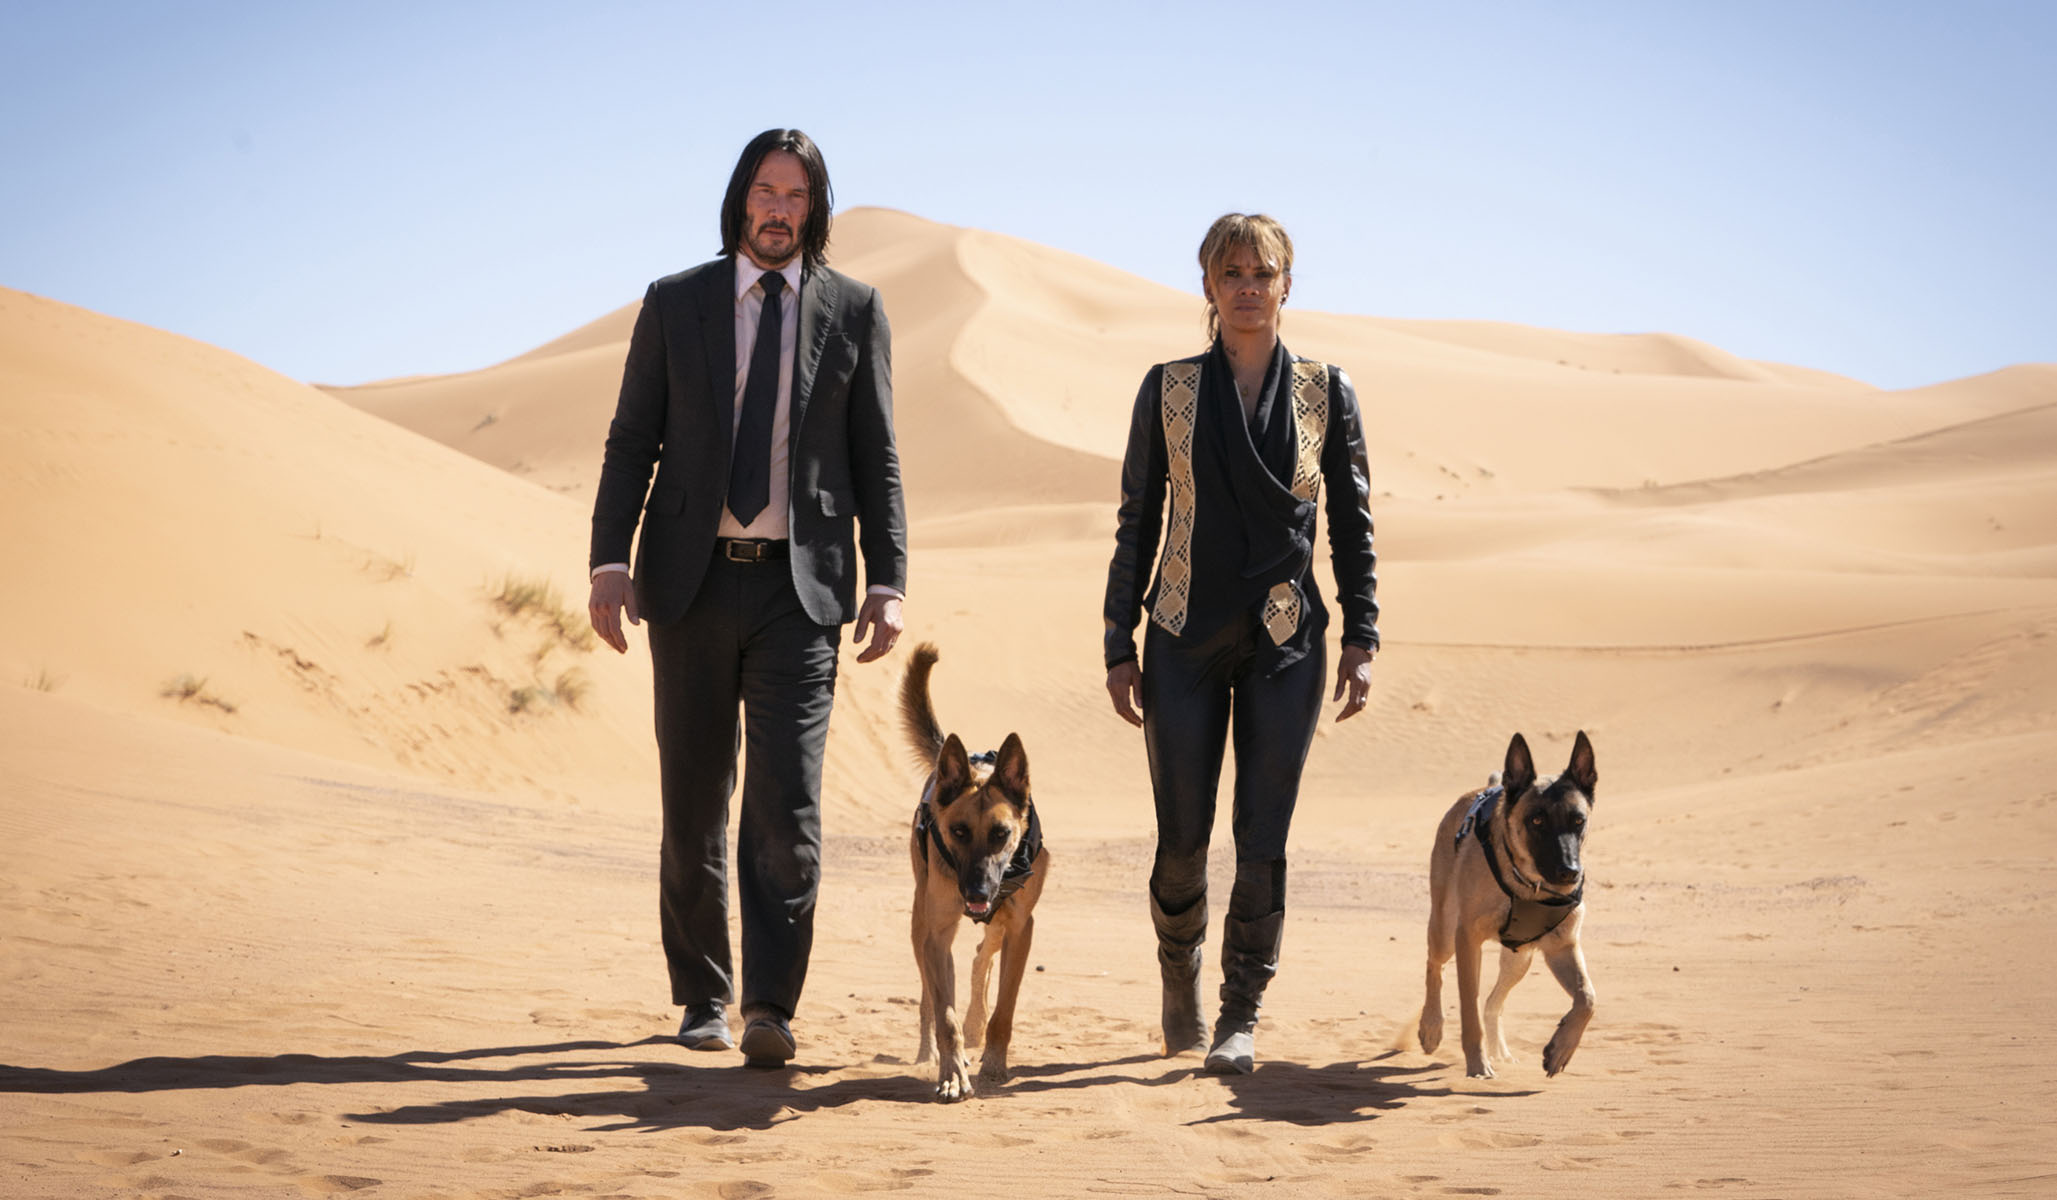 John Wick: Chapter 3 â€” Parabellum' Review: An Ultra-Violent Thrill Ride  with Keanu Reeves | National Review